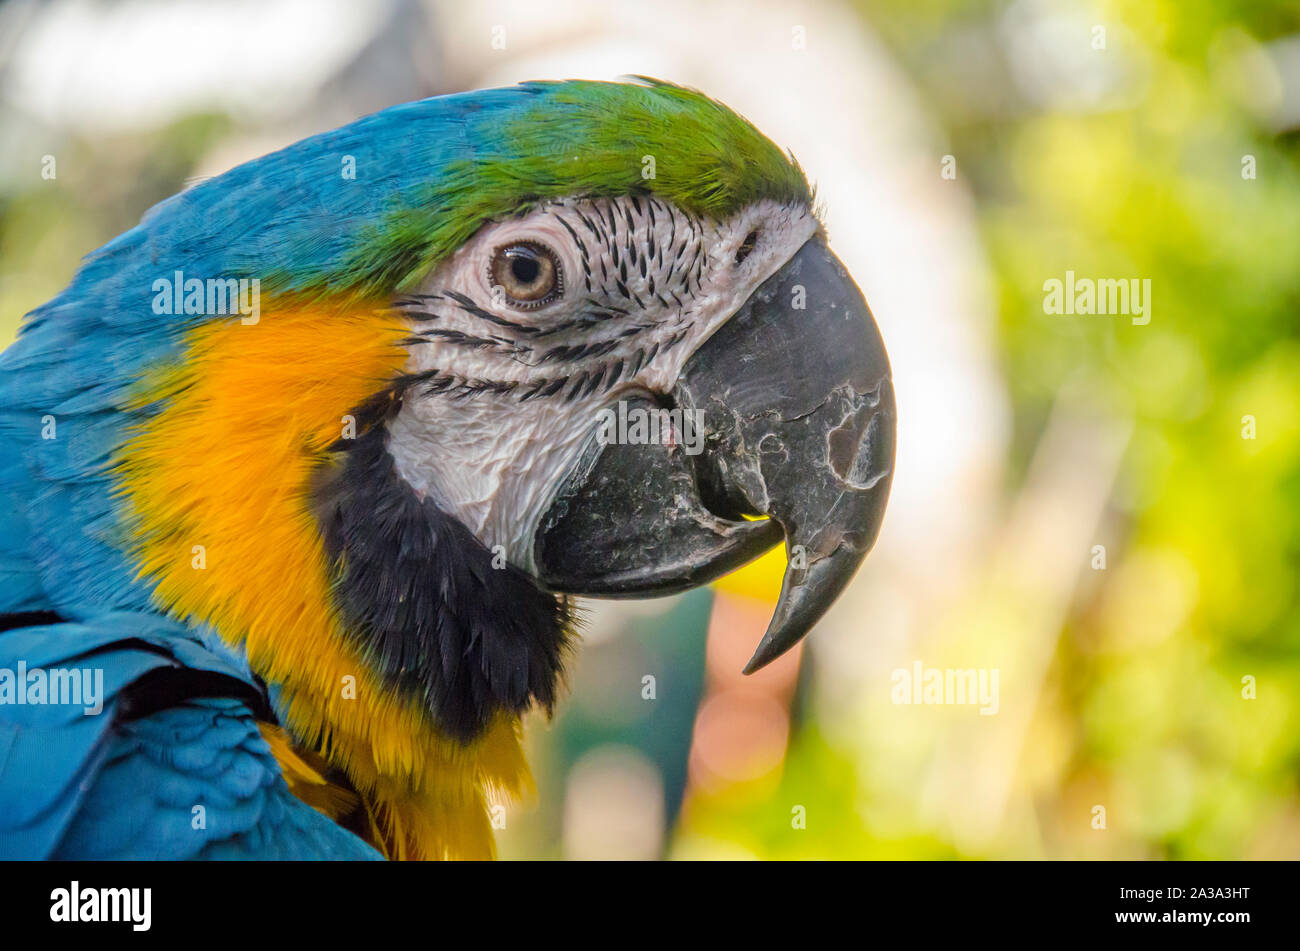 A close up head shot of the blue-and-yellow macaw (Ara ararauna), also known as the blue-and-gold macaw, a bird native to South America Stock Photo